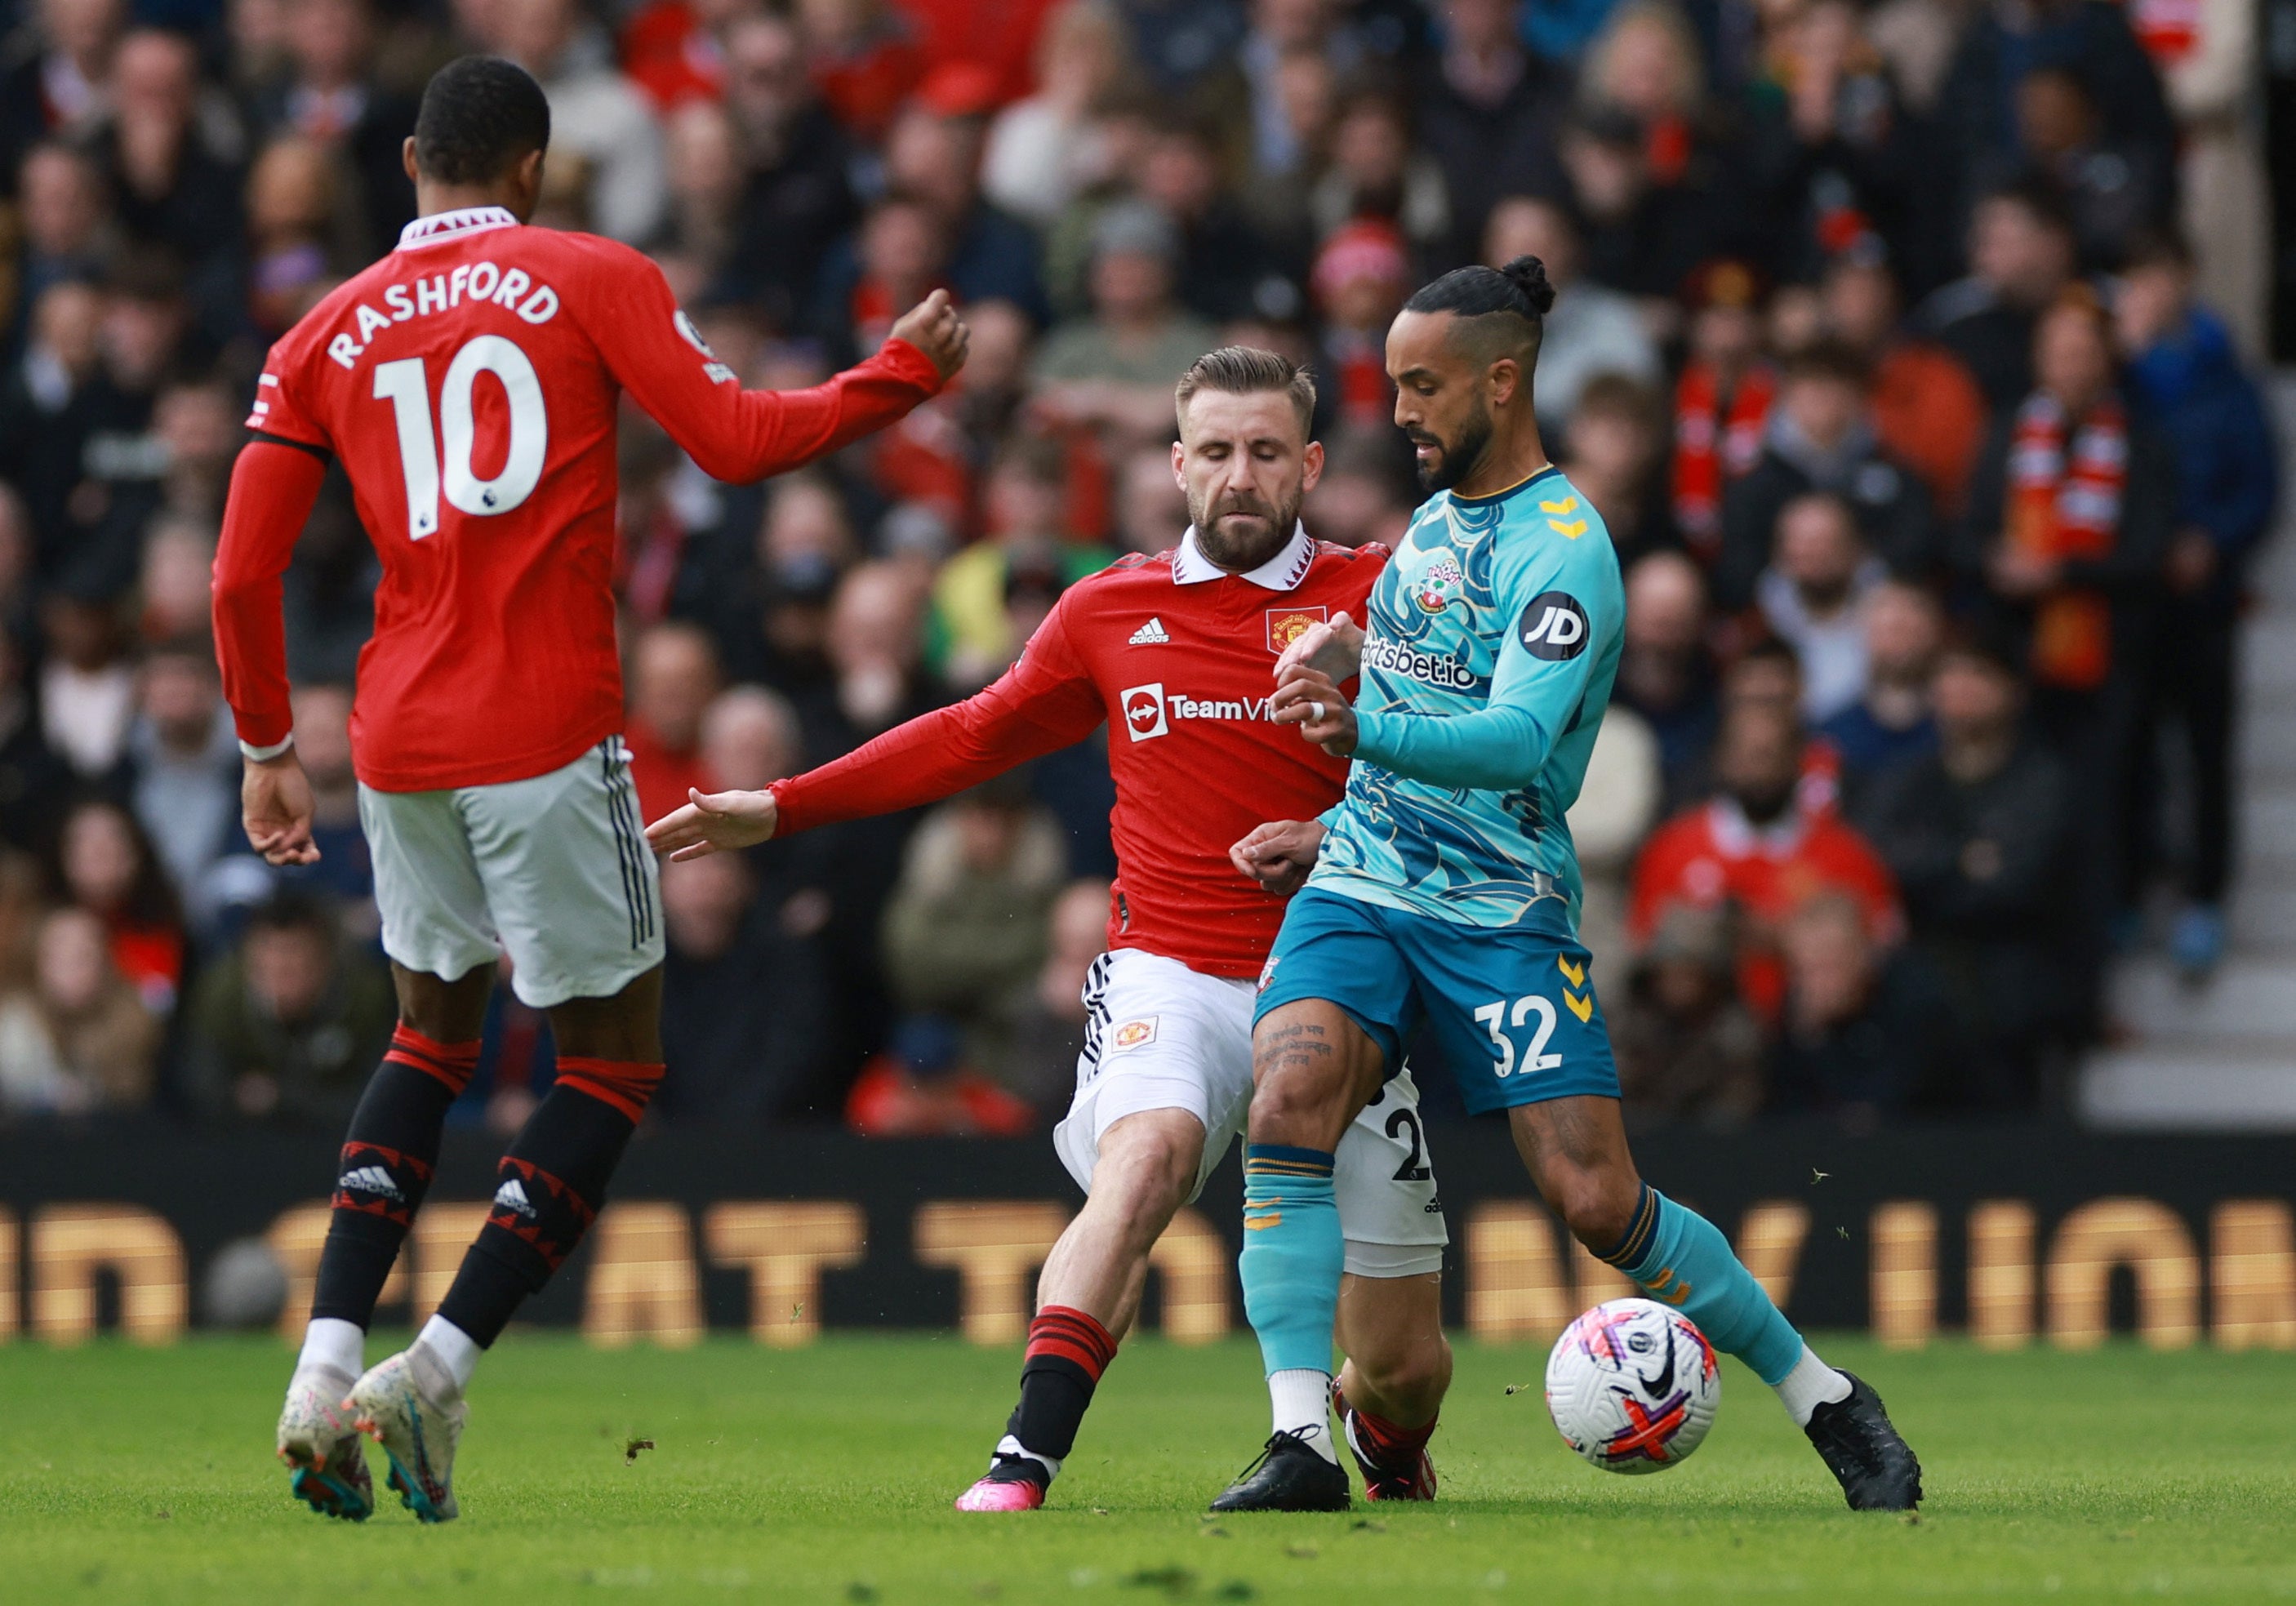 Luke Shaw challenges Theo Walcott in the early stages